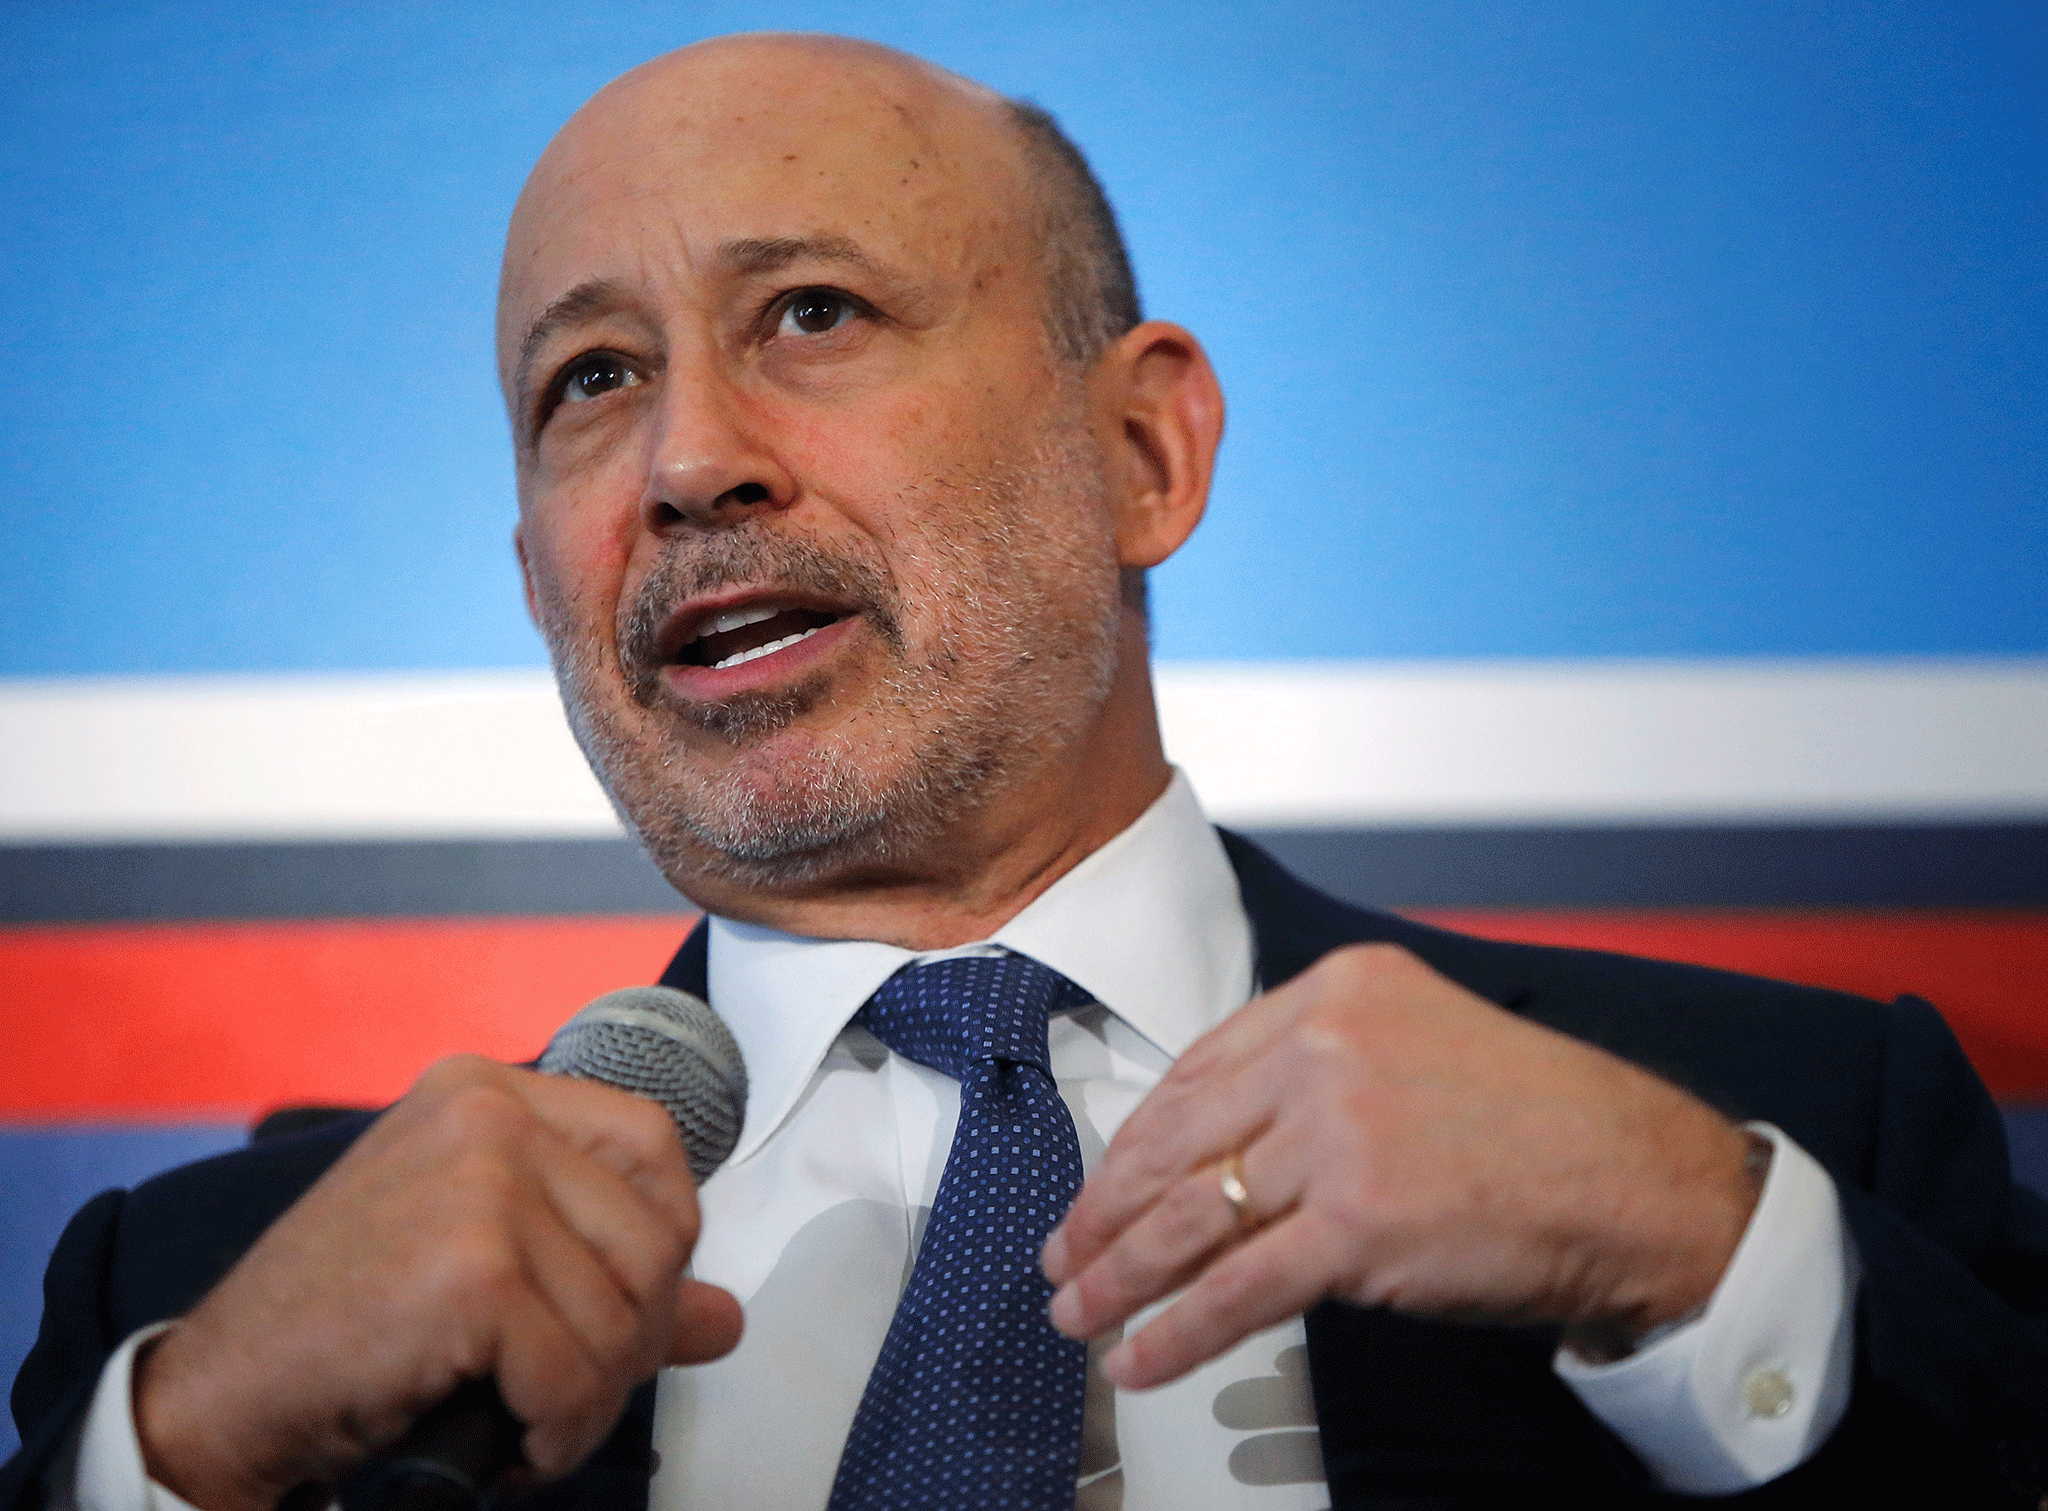 Lloyd Blankfein said his firm has ‘contingency plans’ to relocate people depending on the outcome of the negotiations